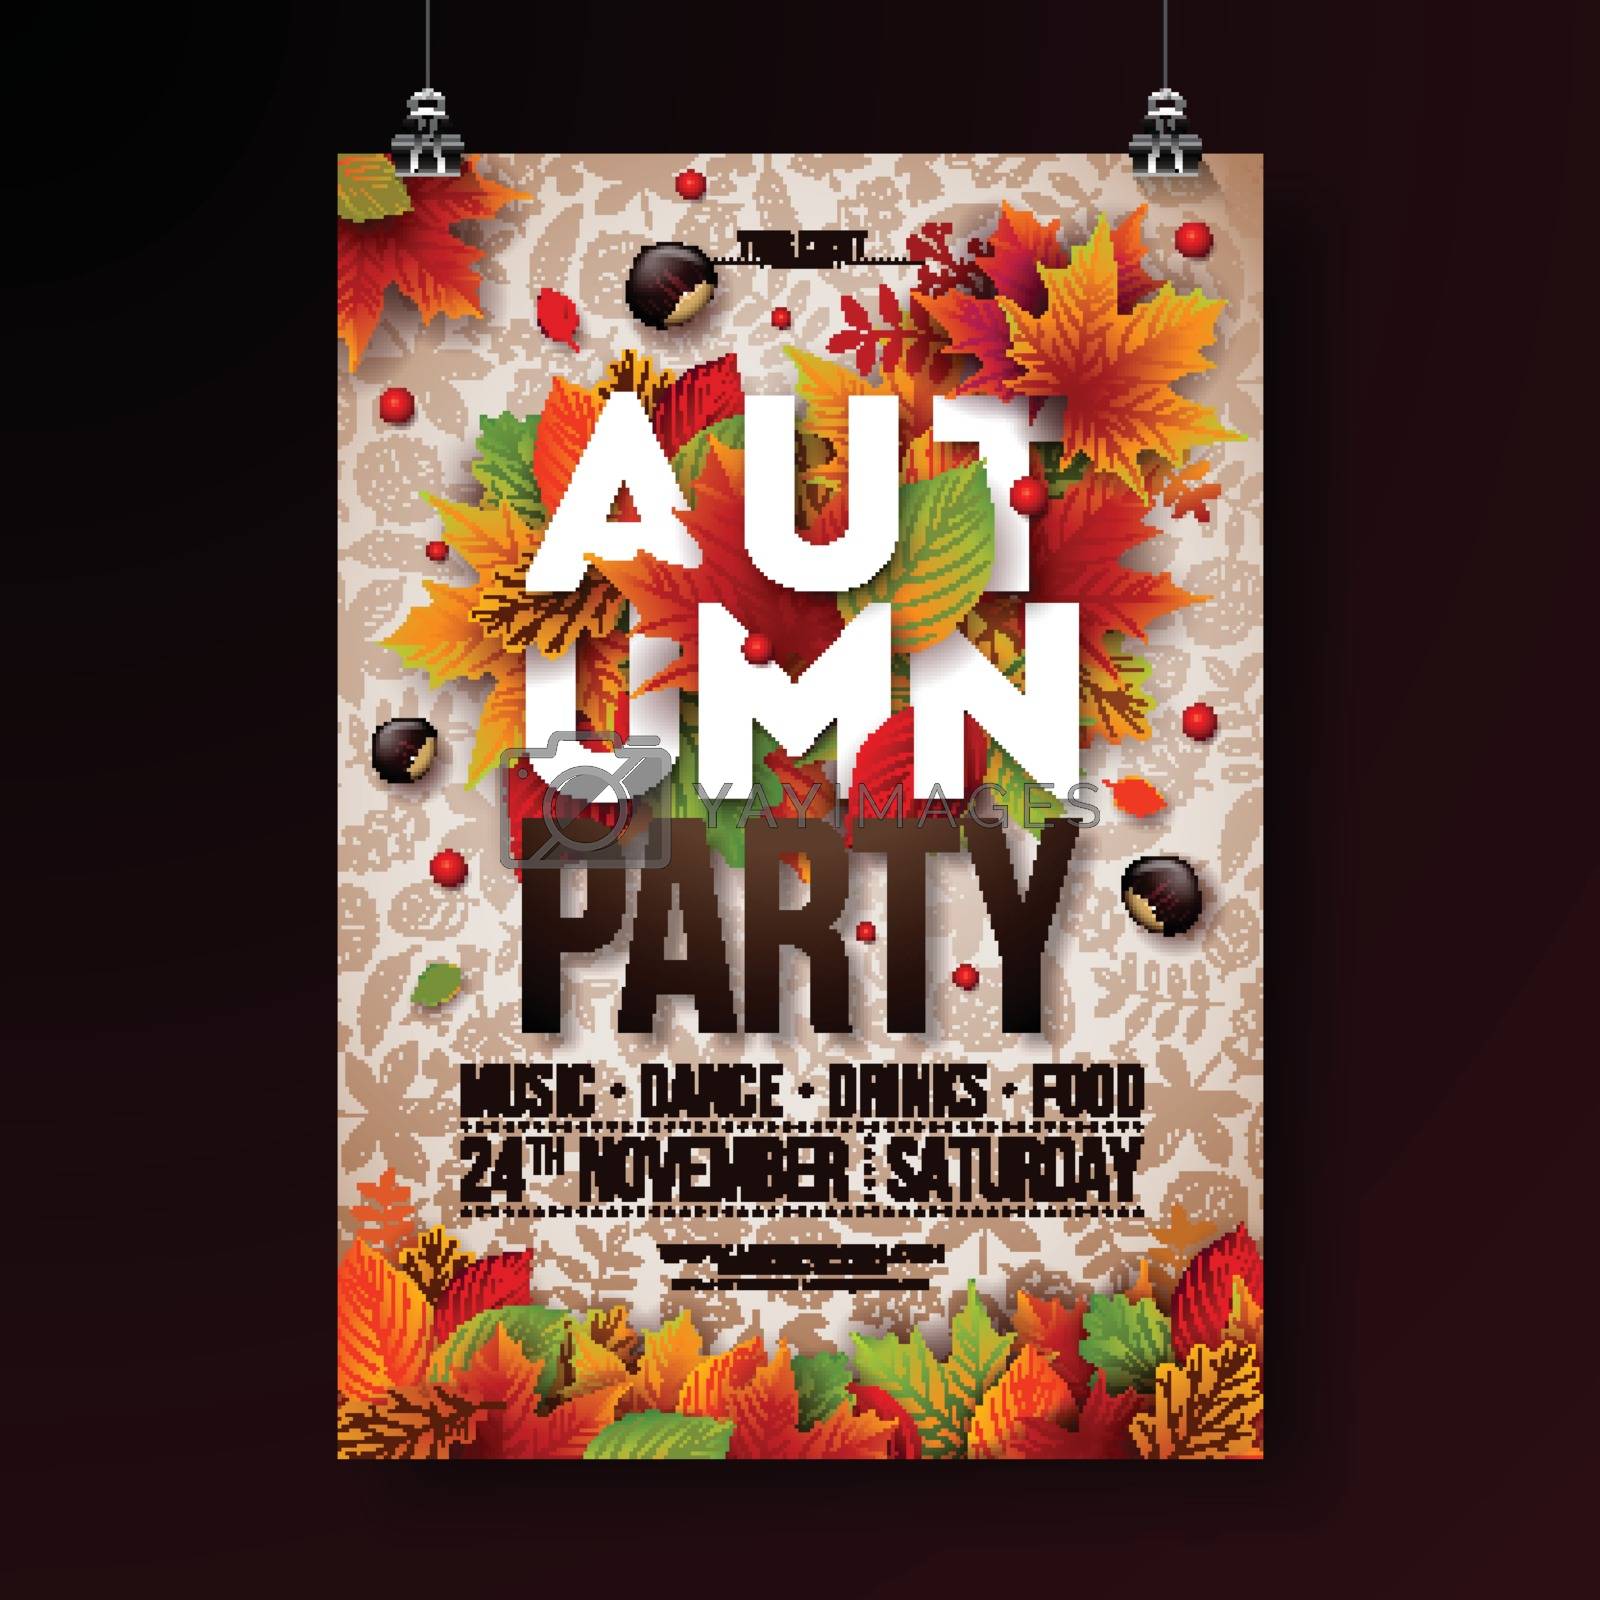 Royalty free image of Autumn Party Flyer Illustration with falling leaves and typography design on doodle pattern background. Vector Autumnal Fall Festival Design for Invitation or Holiday Celebration Poster. by articular